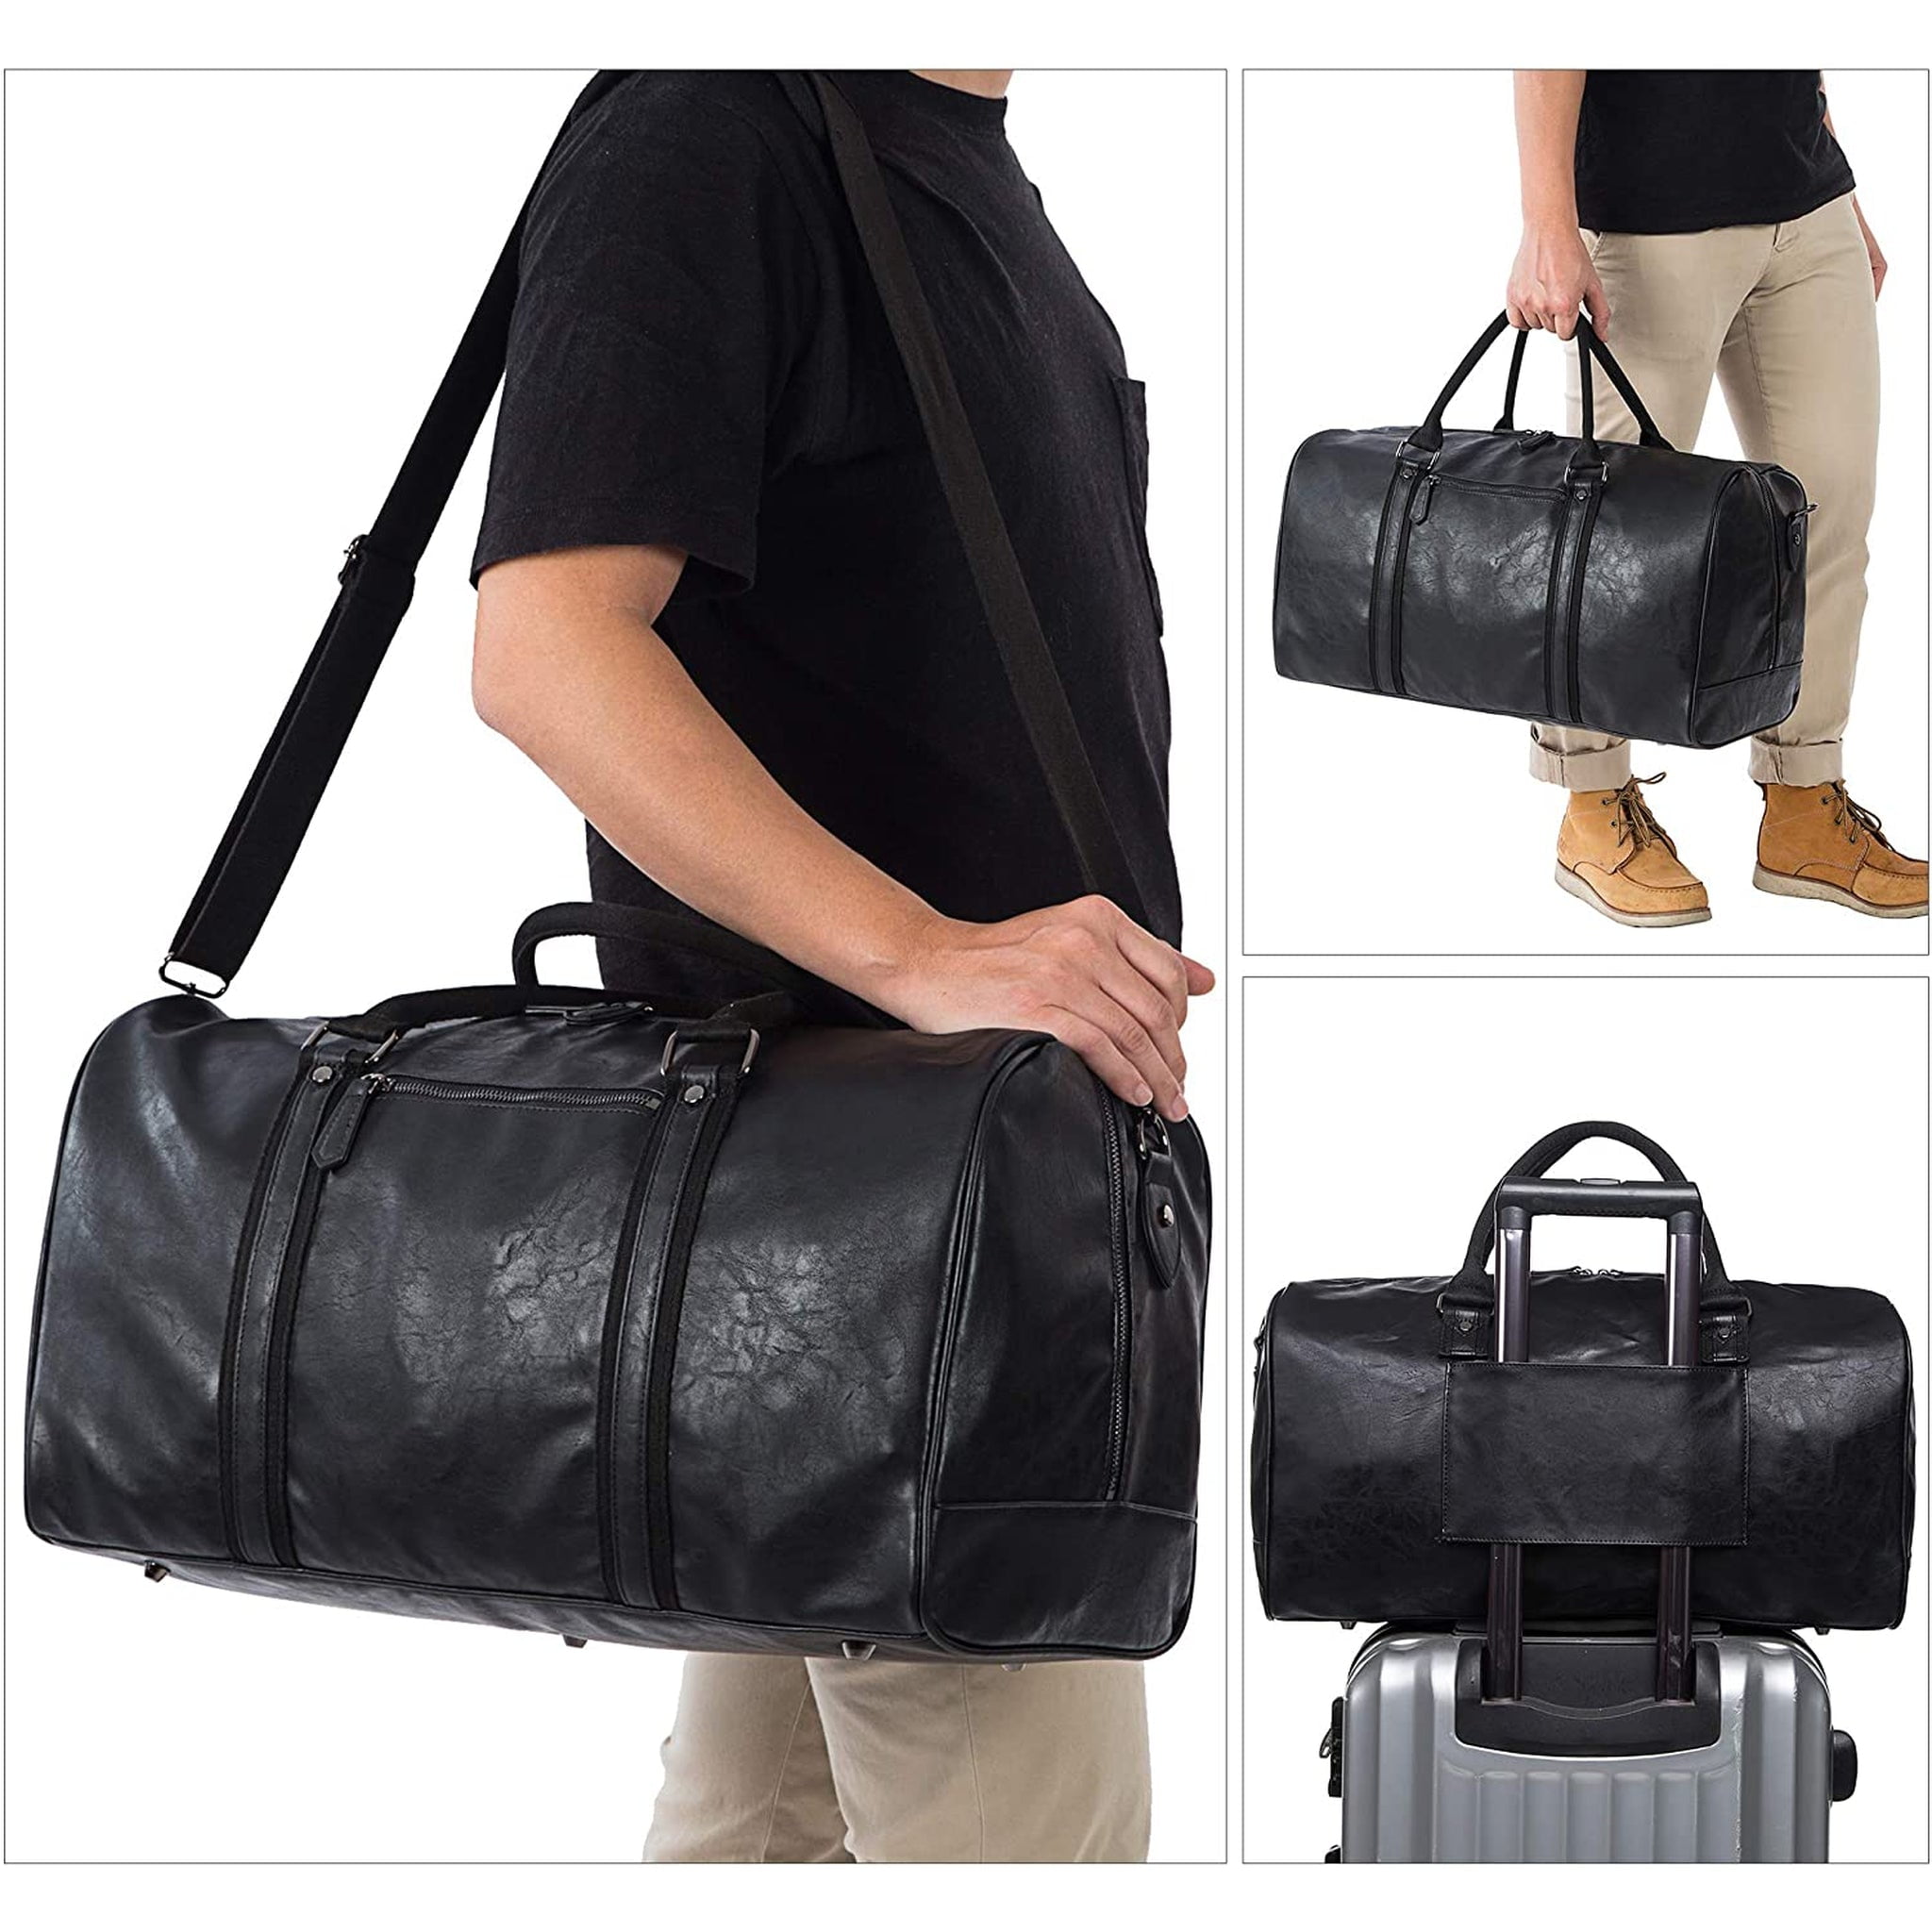 Leather Duffle Bags, for Travel Use, Pattern : Plain at Rs 700